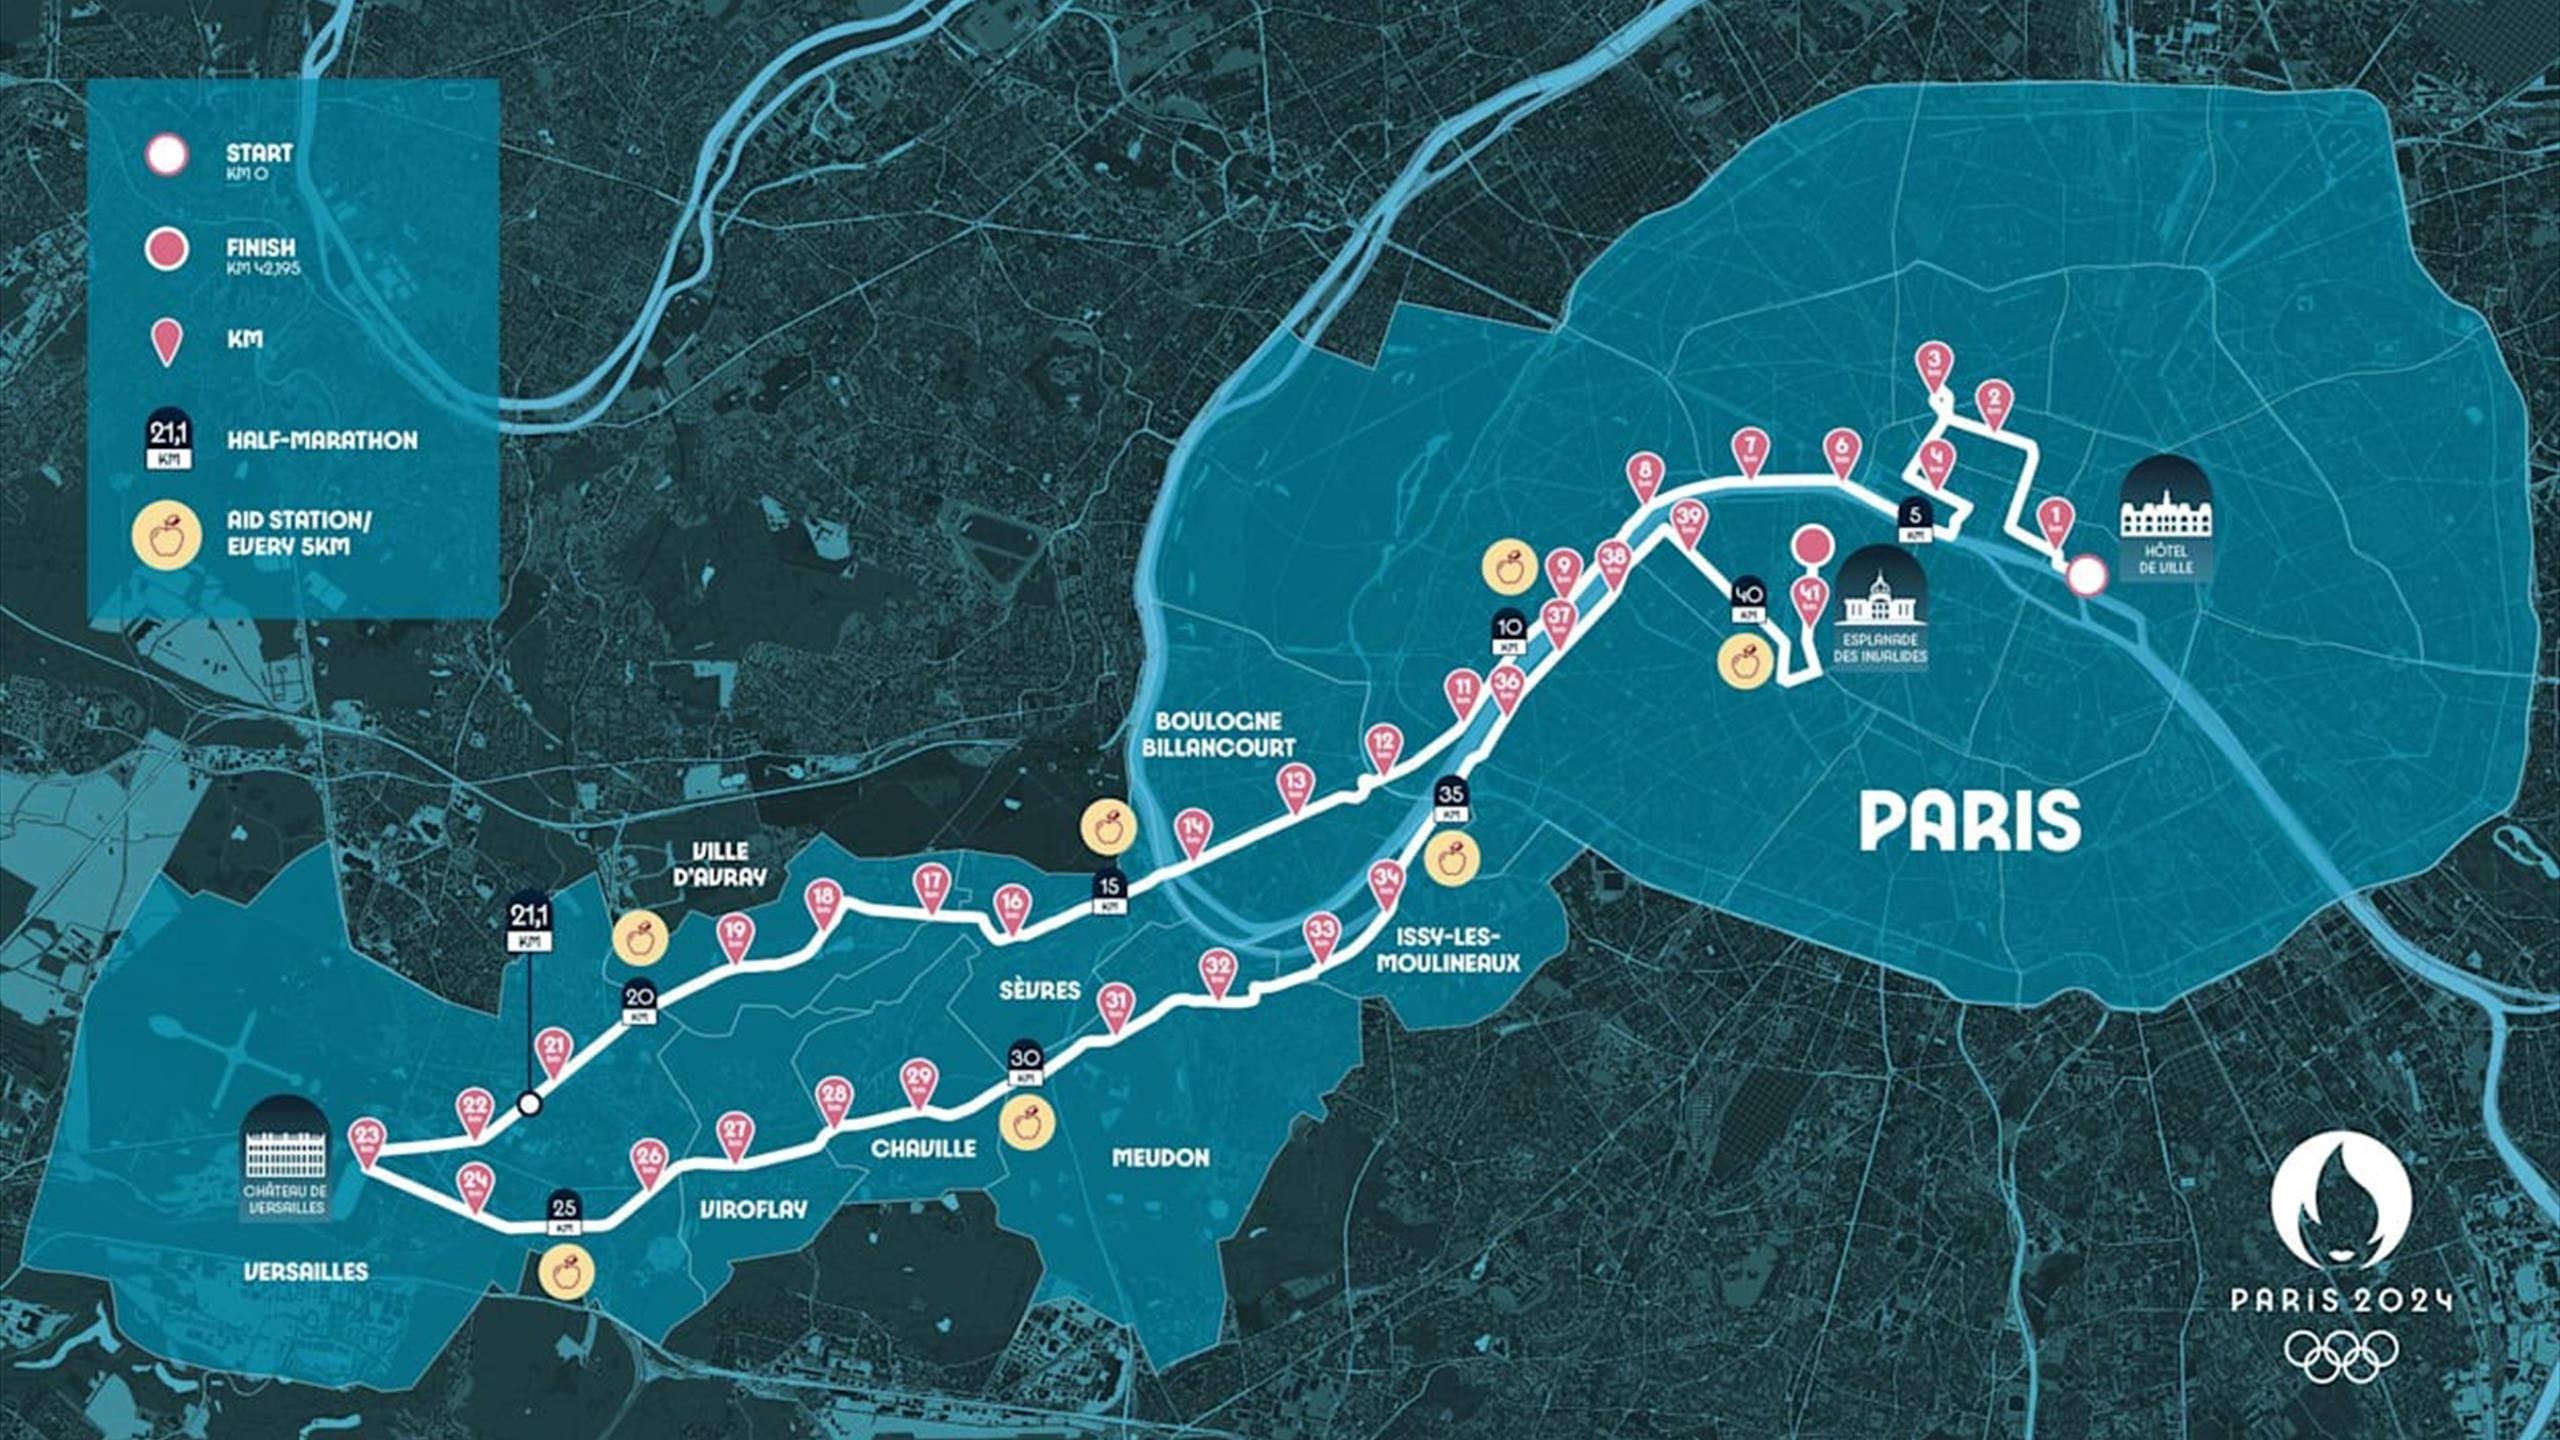 Paris 2024 Olympic marathon route Runners set to take in Louvre and